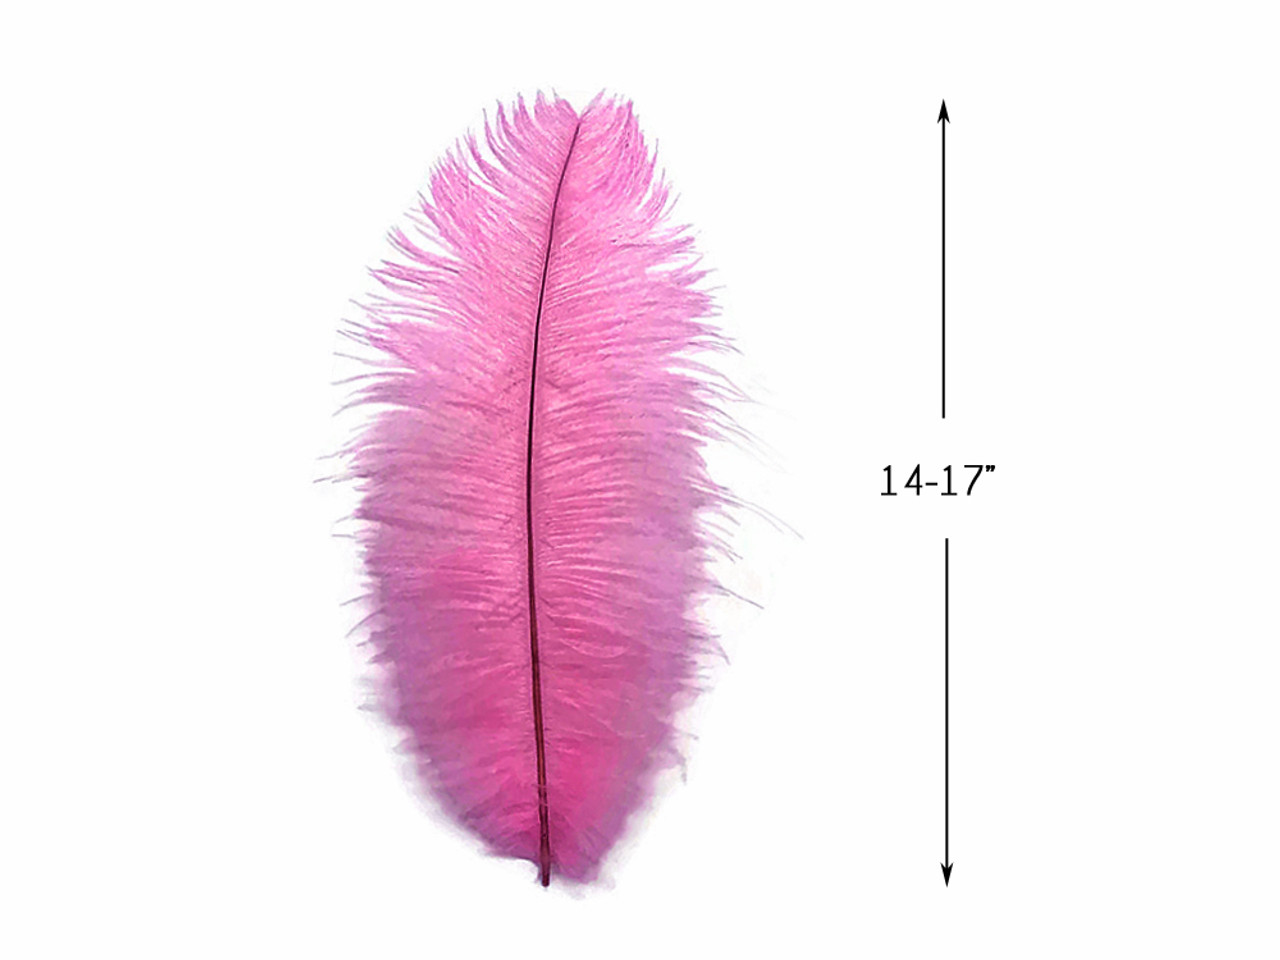 1/2 Lb. - 18-24 Off White Large Ostrich Wing Plume Wholesale Feathers  (Bulk)